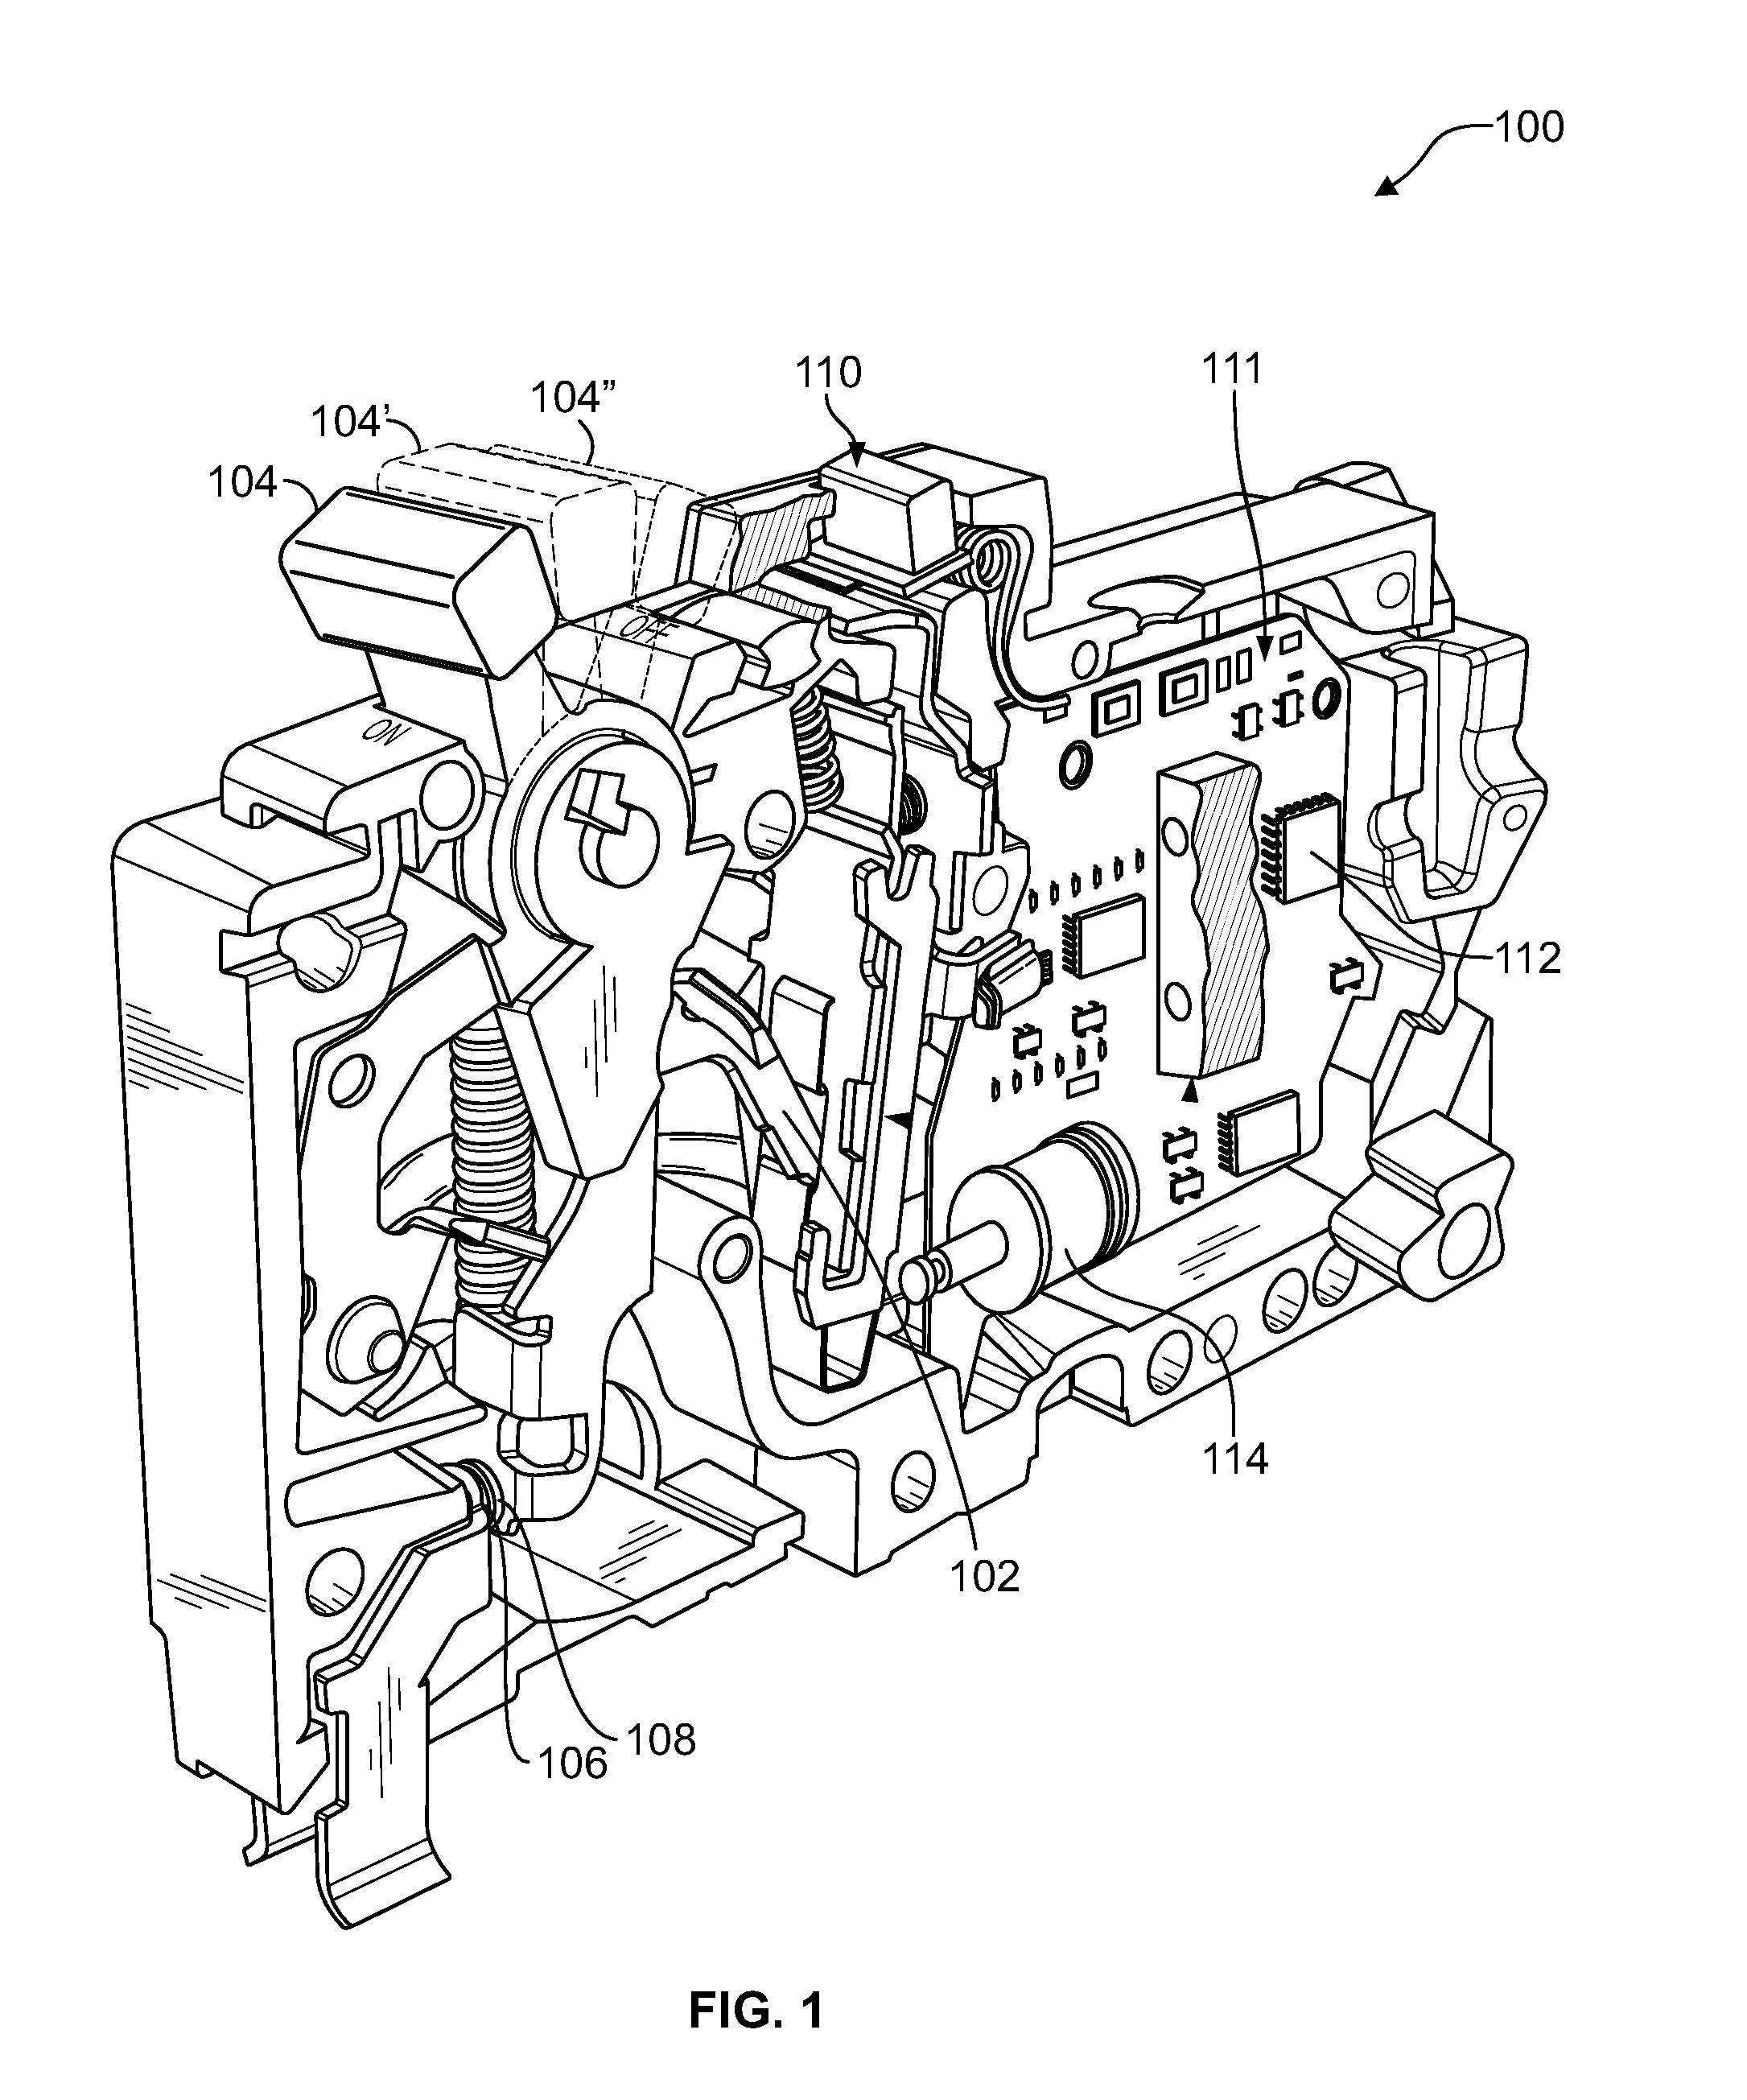 Electronic miniature circuit breaker with trip indication using the breaker tripping function as the feedback mechanism